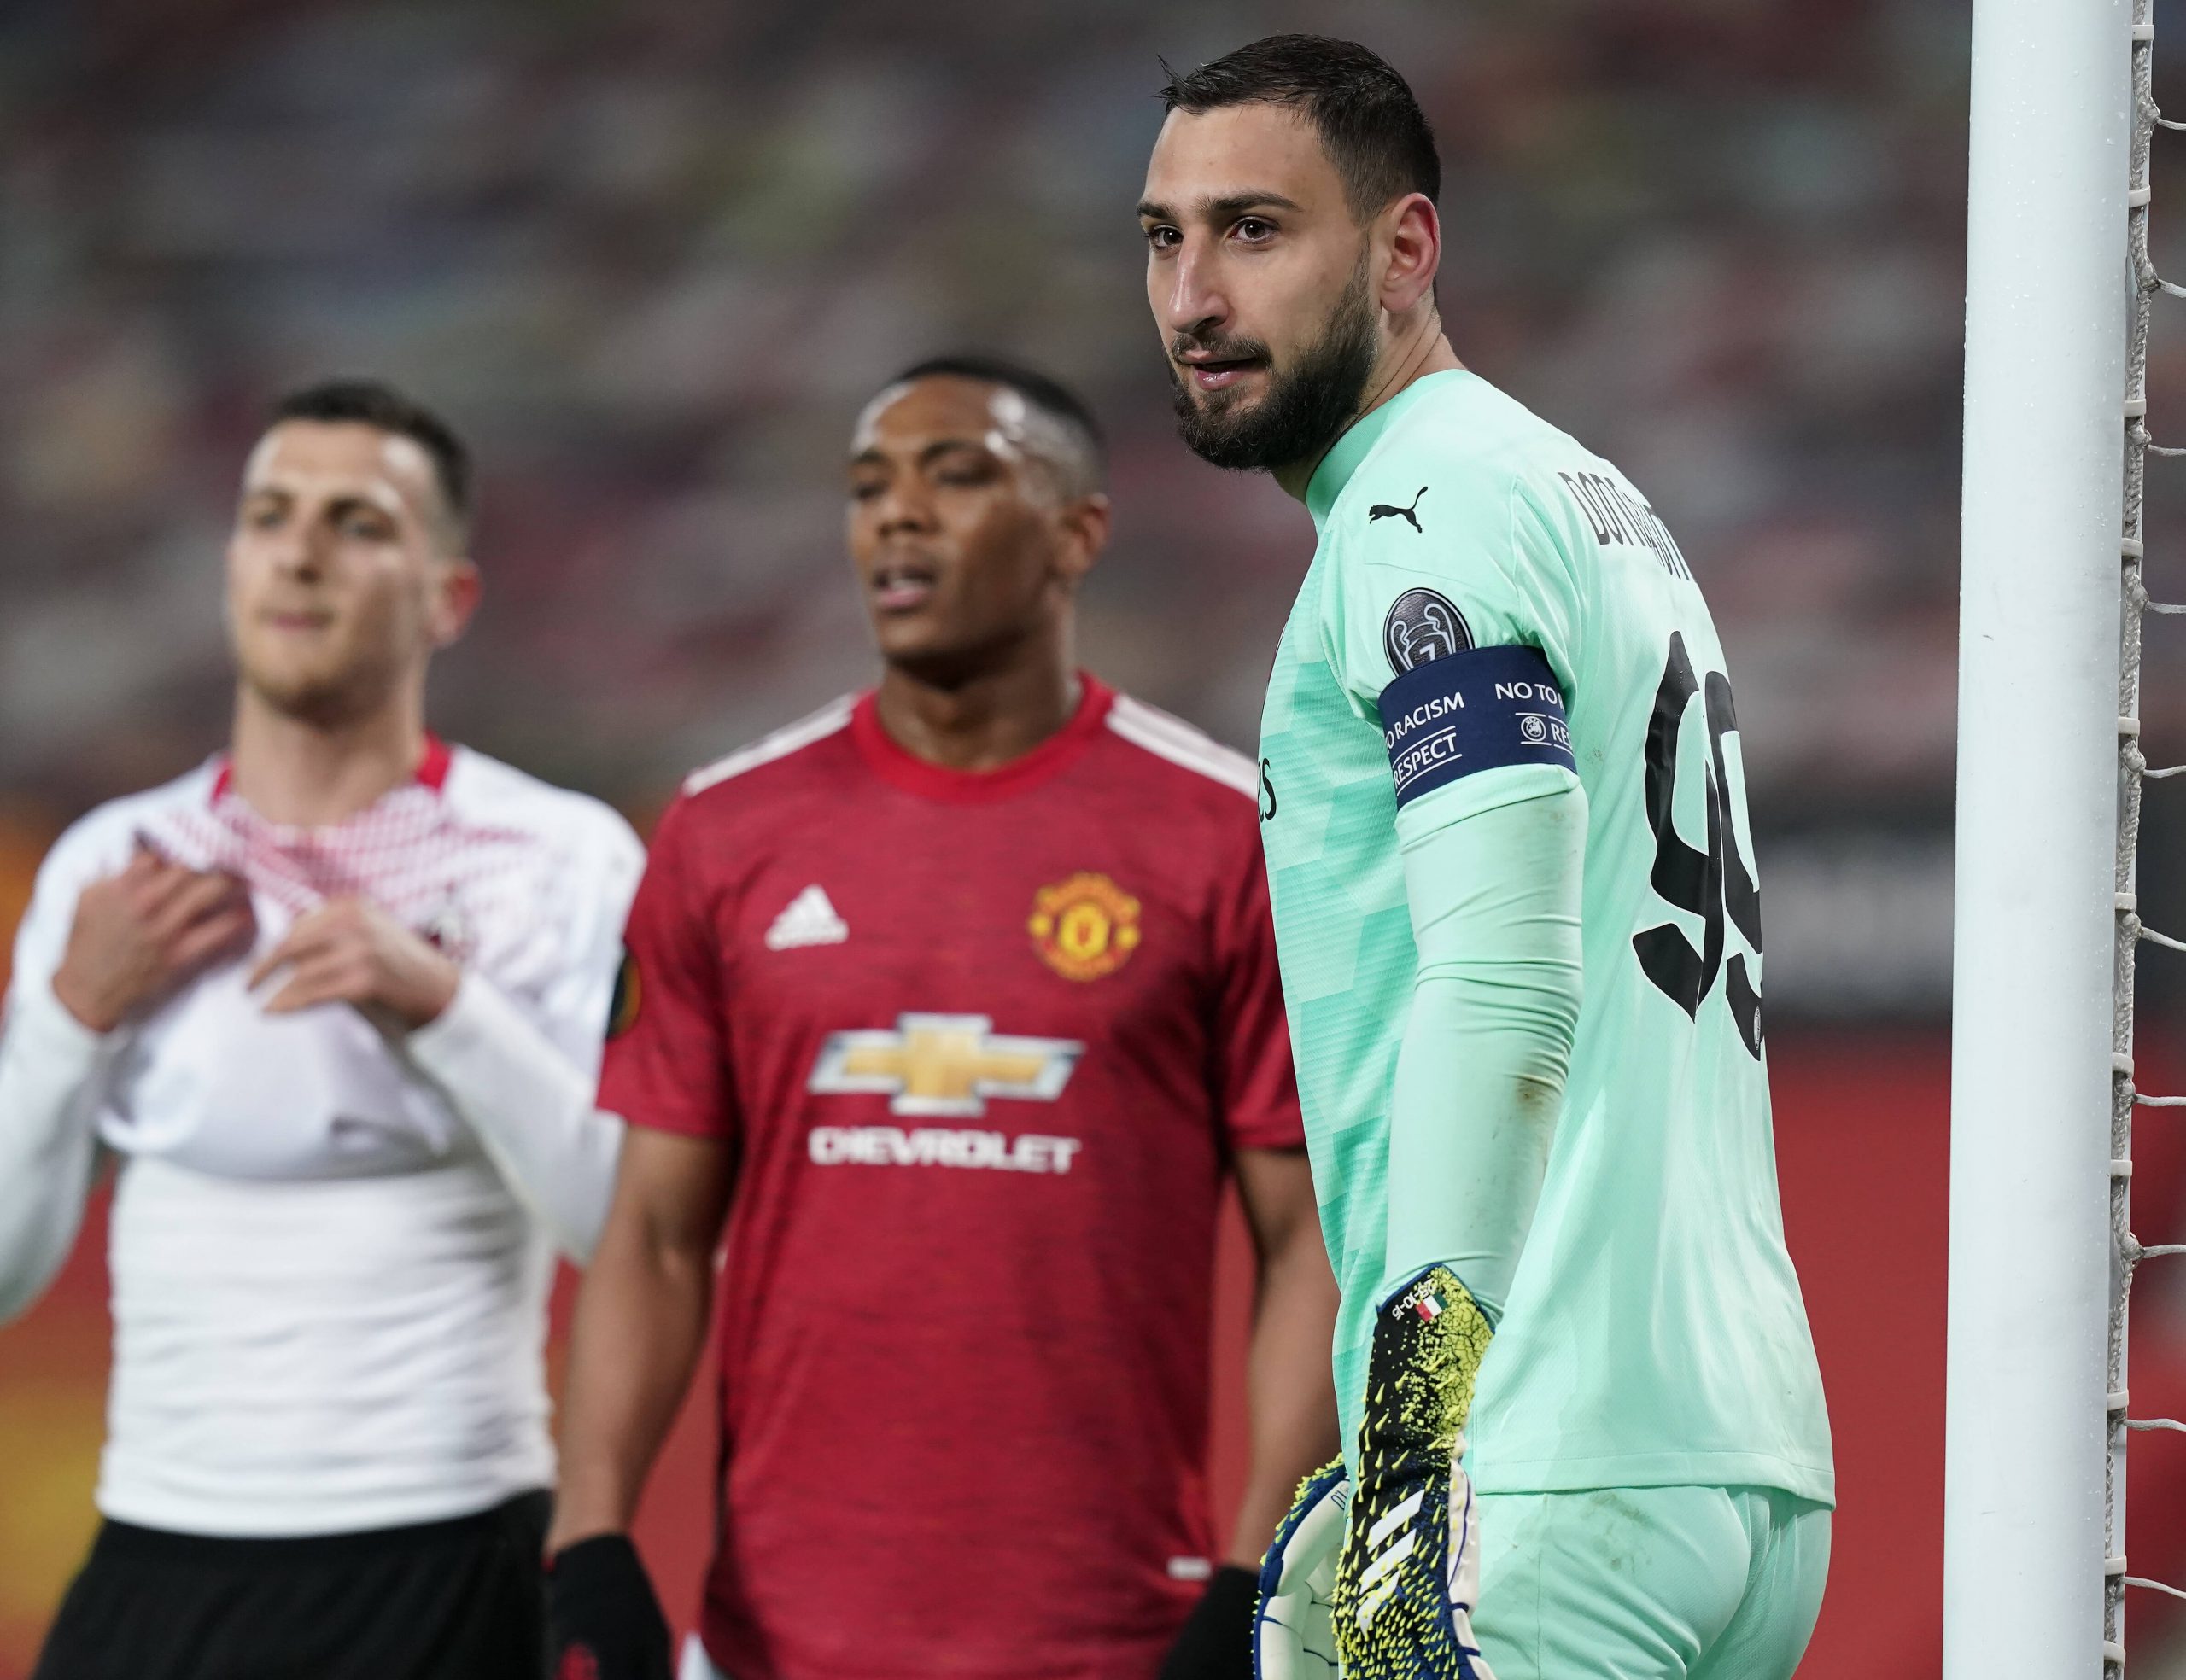 Gianluigi Donnarumma of AC Milan during the UEFA Europa League match at Old Trafford, Manchester.